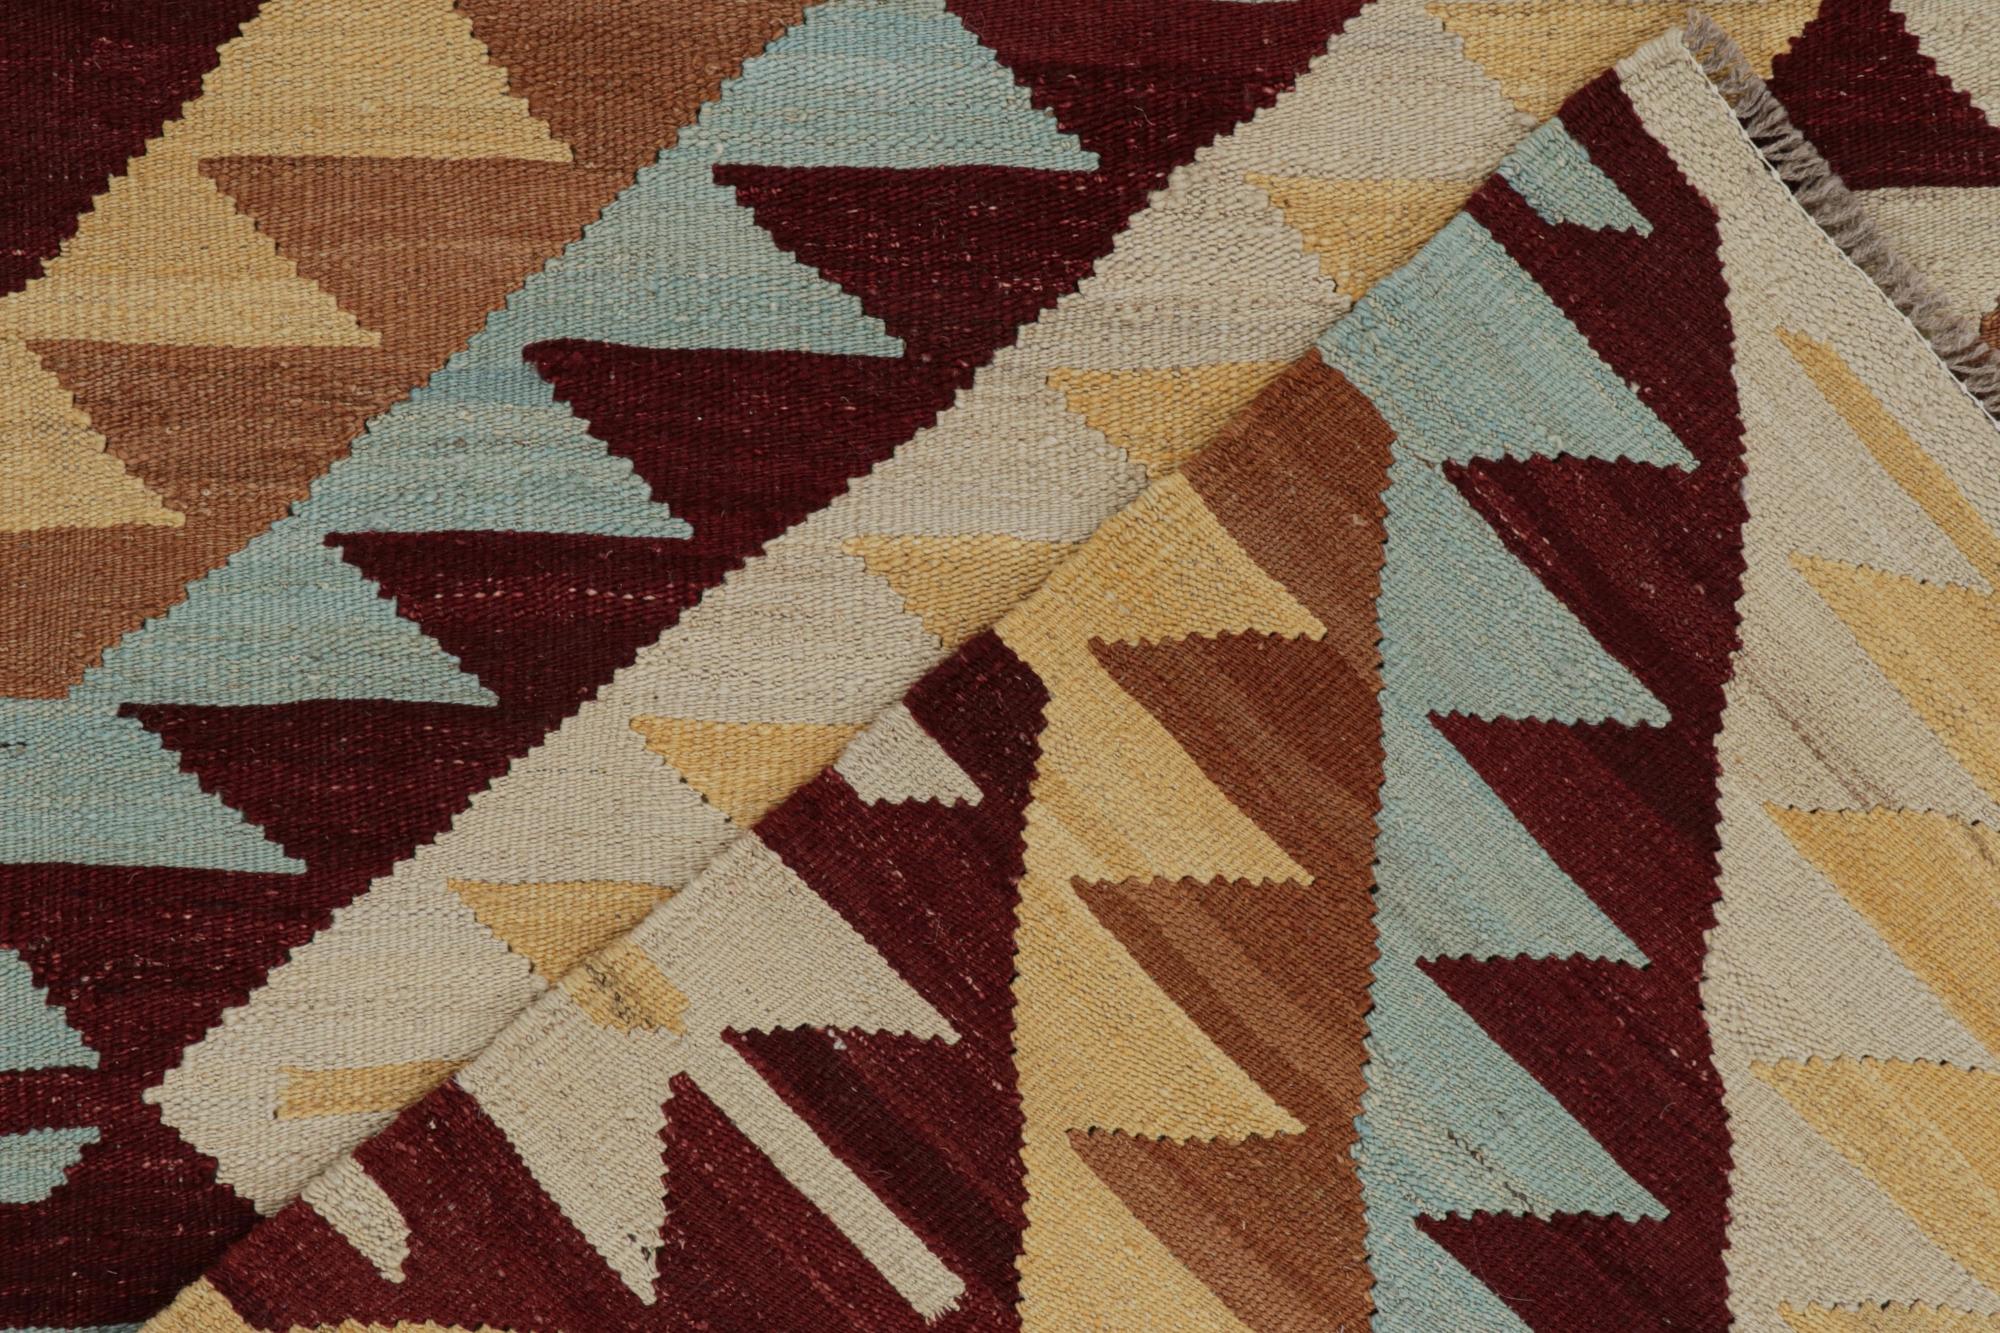 Wool Rug & Kilim’s Tribal Style Kilim in Red, Blue and Beige-Brown Geometric Patterns For Sale